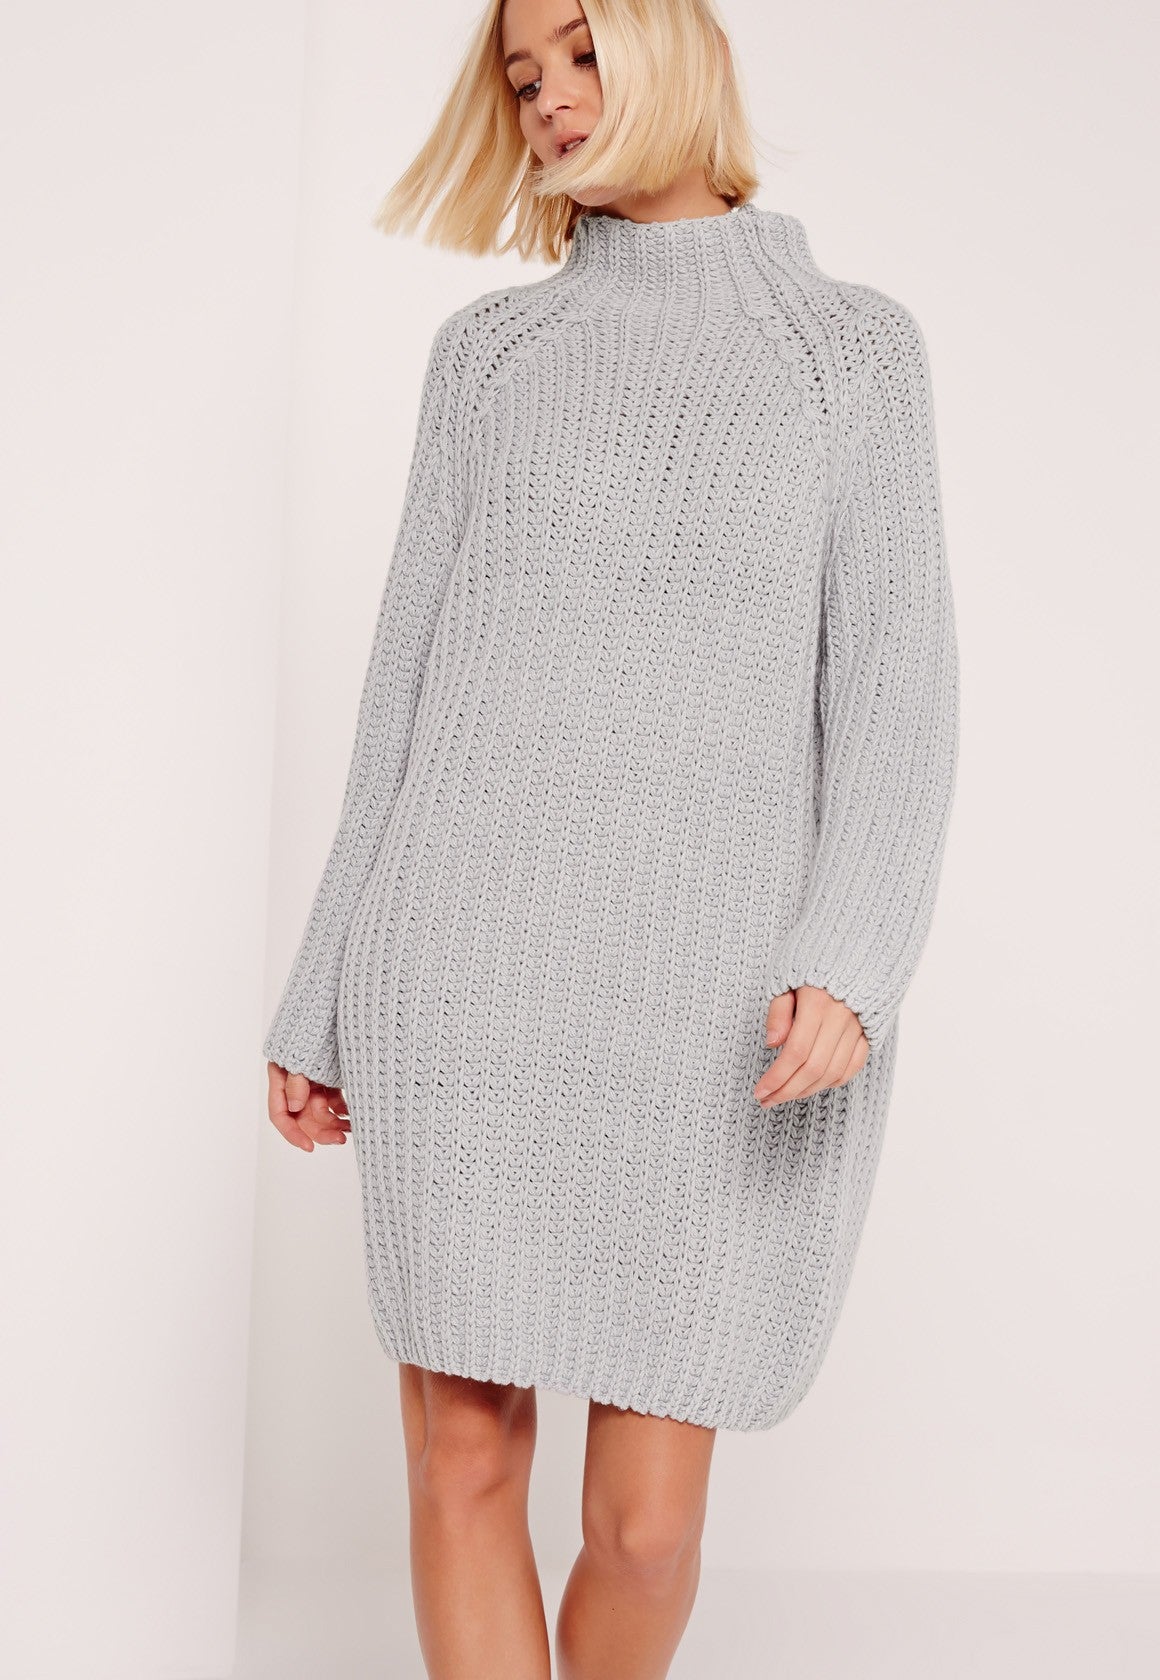 9 Celeb Inspired Sweater Dresses That'll Keep You Cozy and Cute
